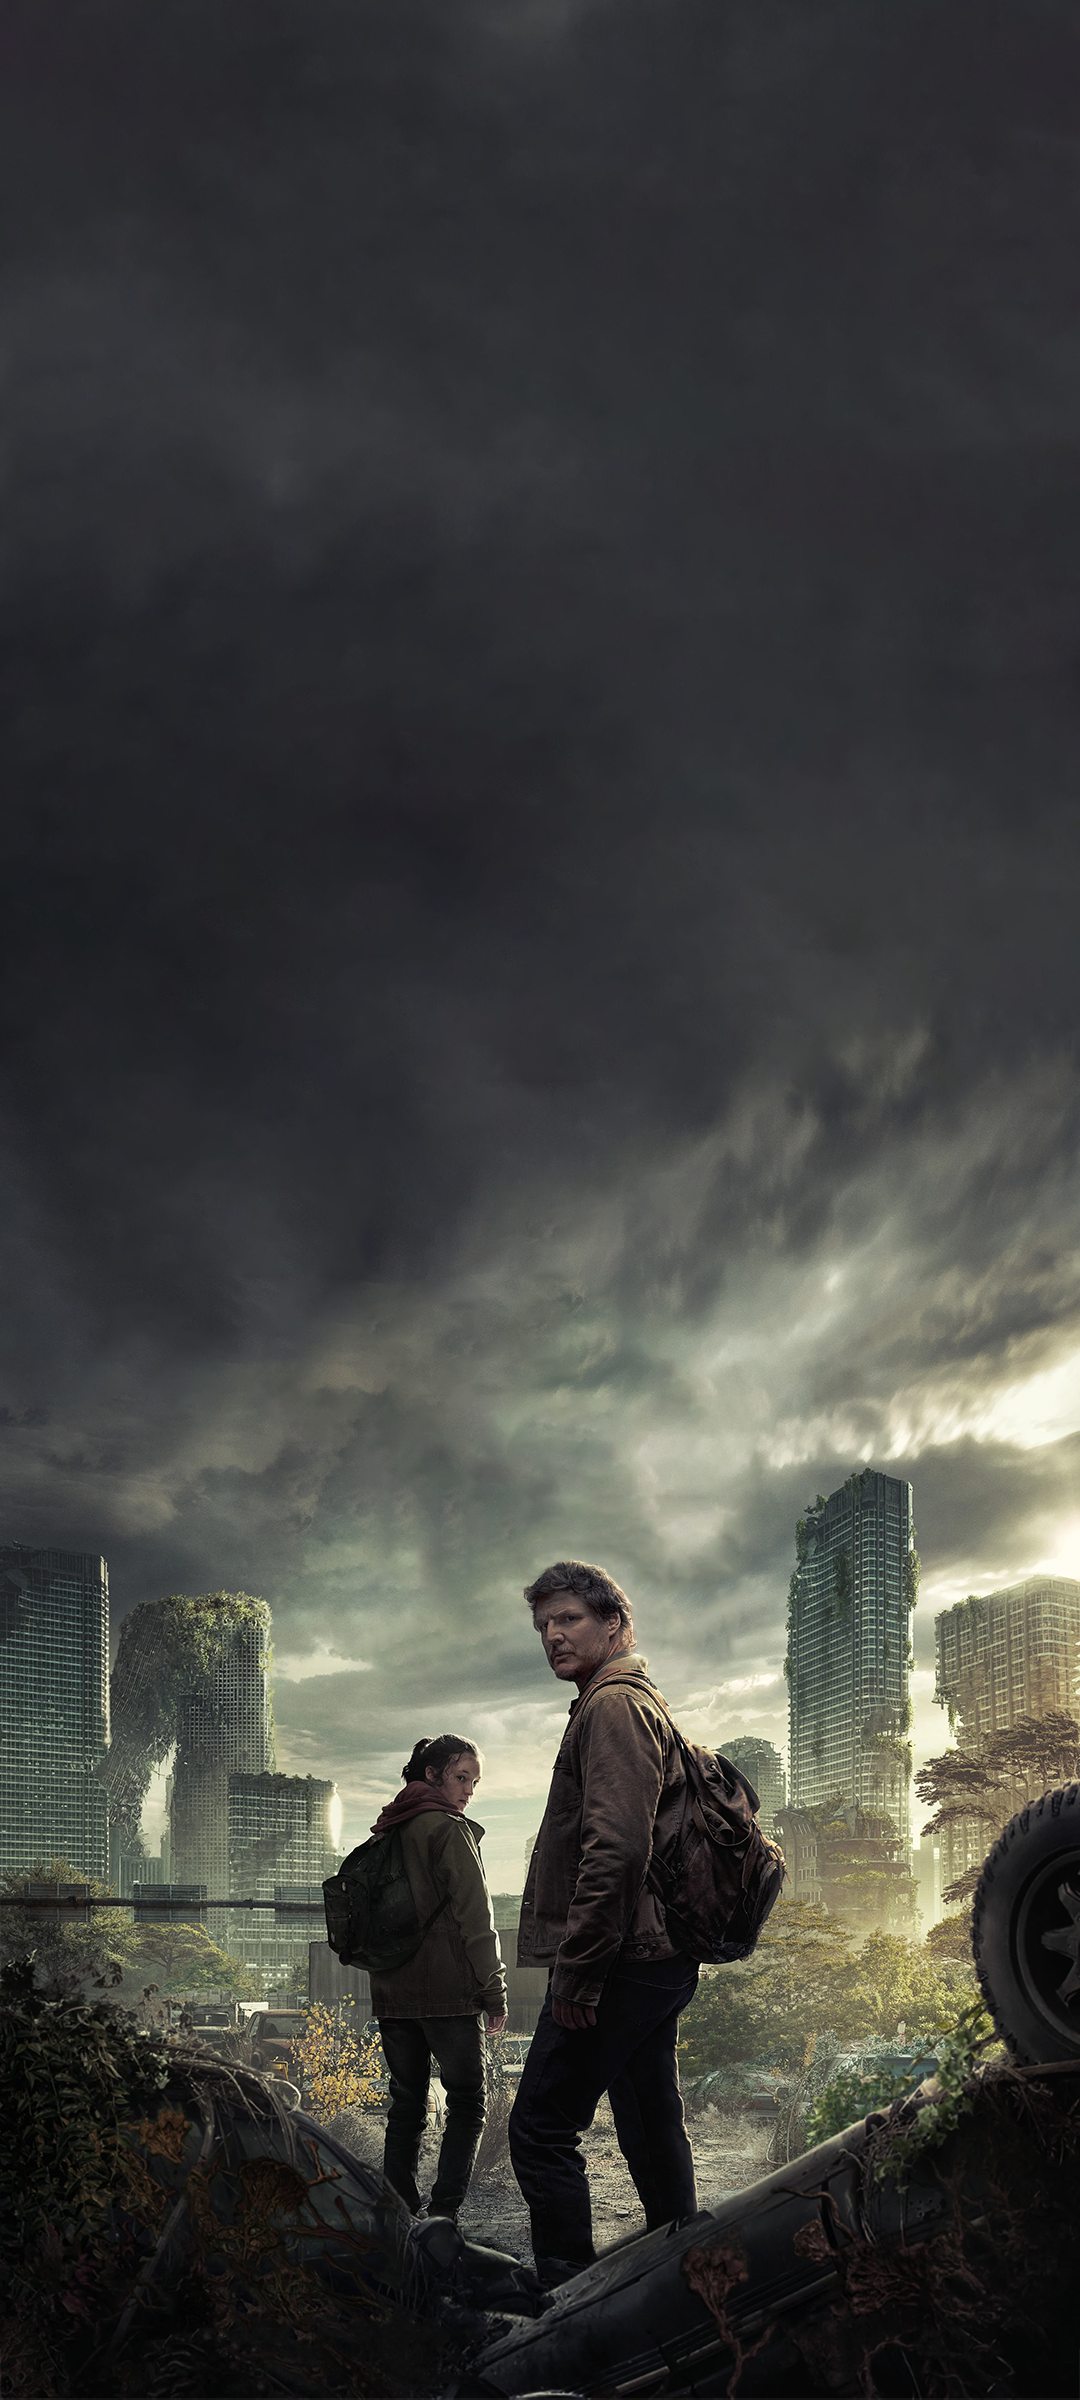 The Last of Us HBO Wallpaper for Phone 4k